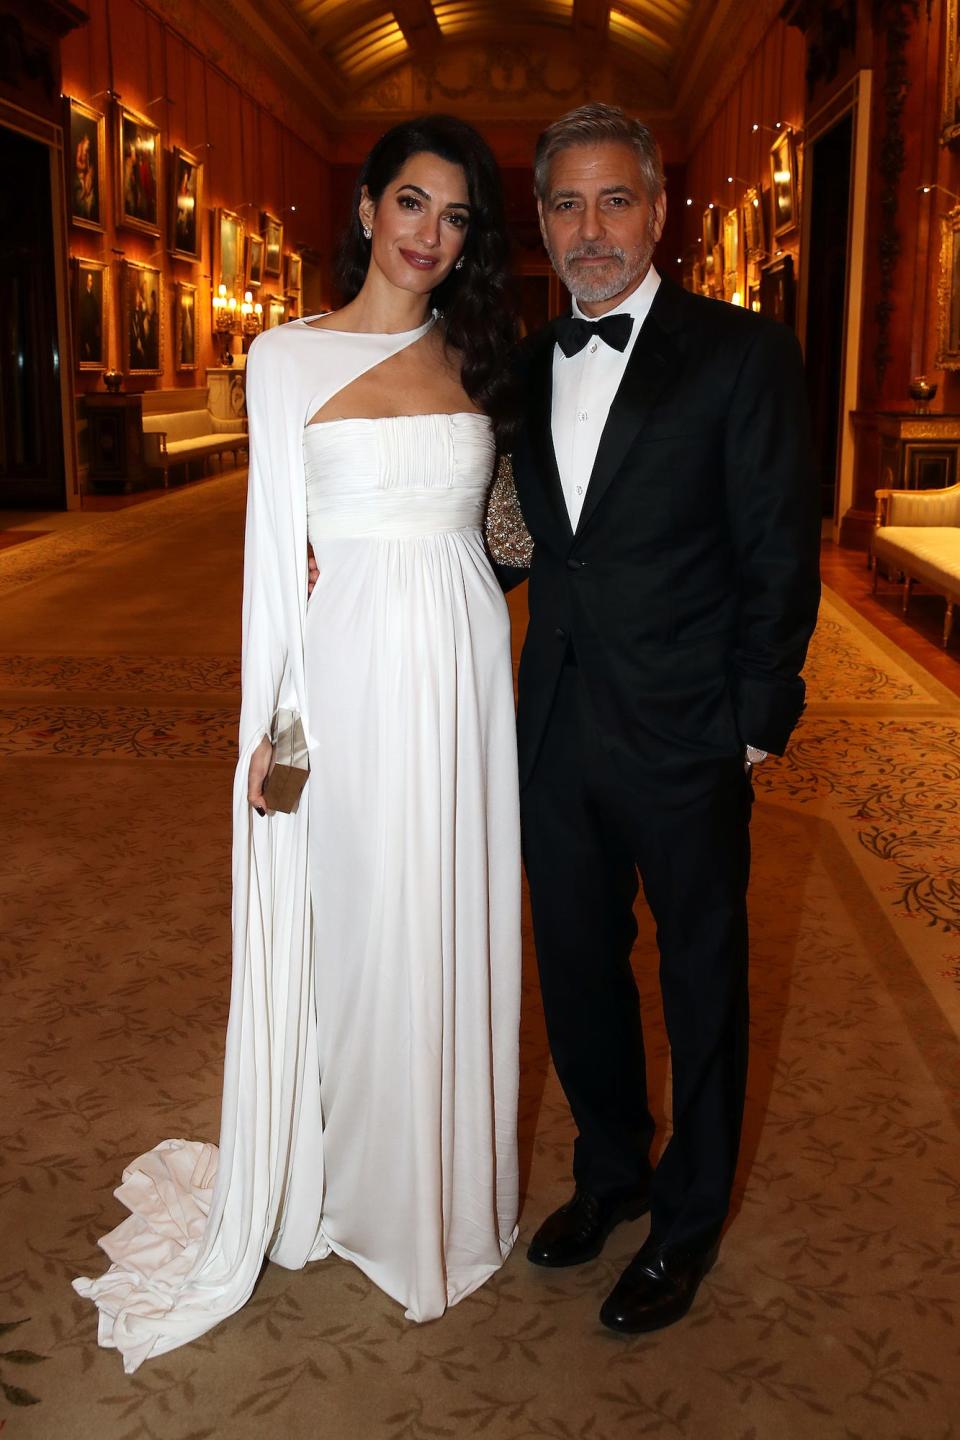 The Clooney's at a dinner hosted by Prince Charles in London, England, on March 12, 2019.